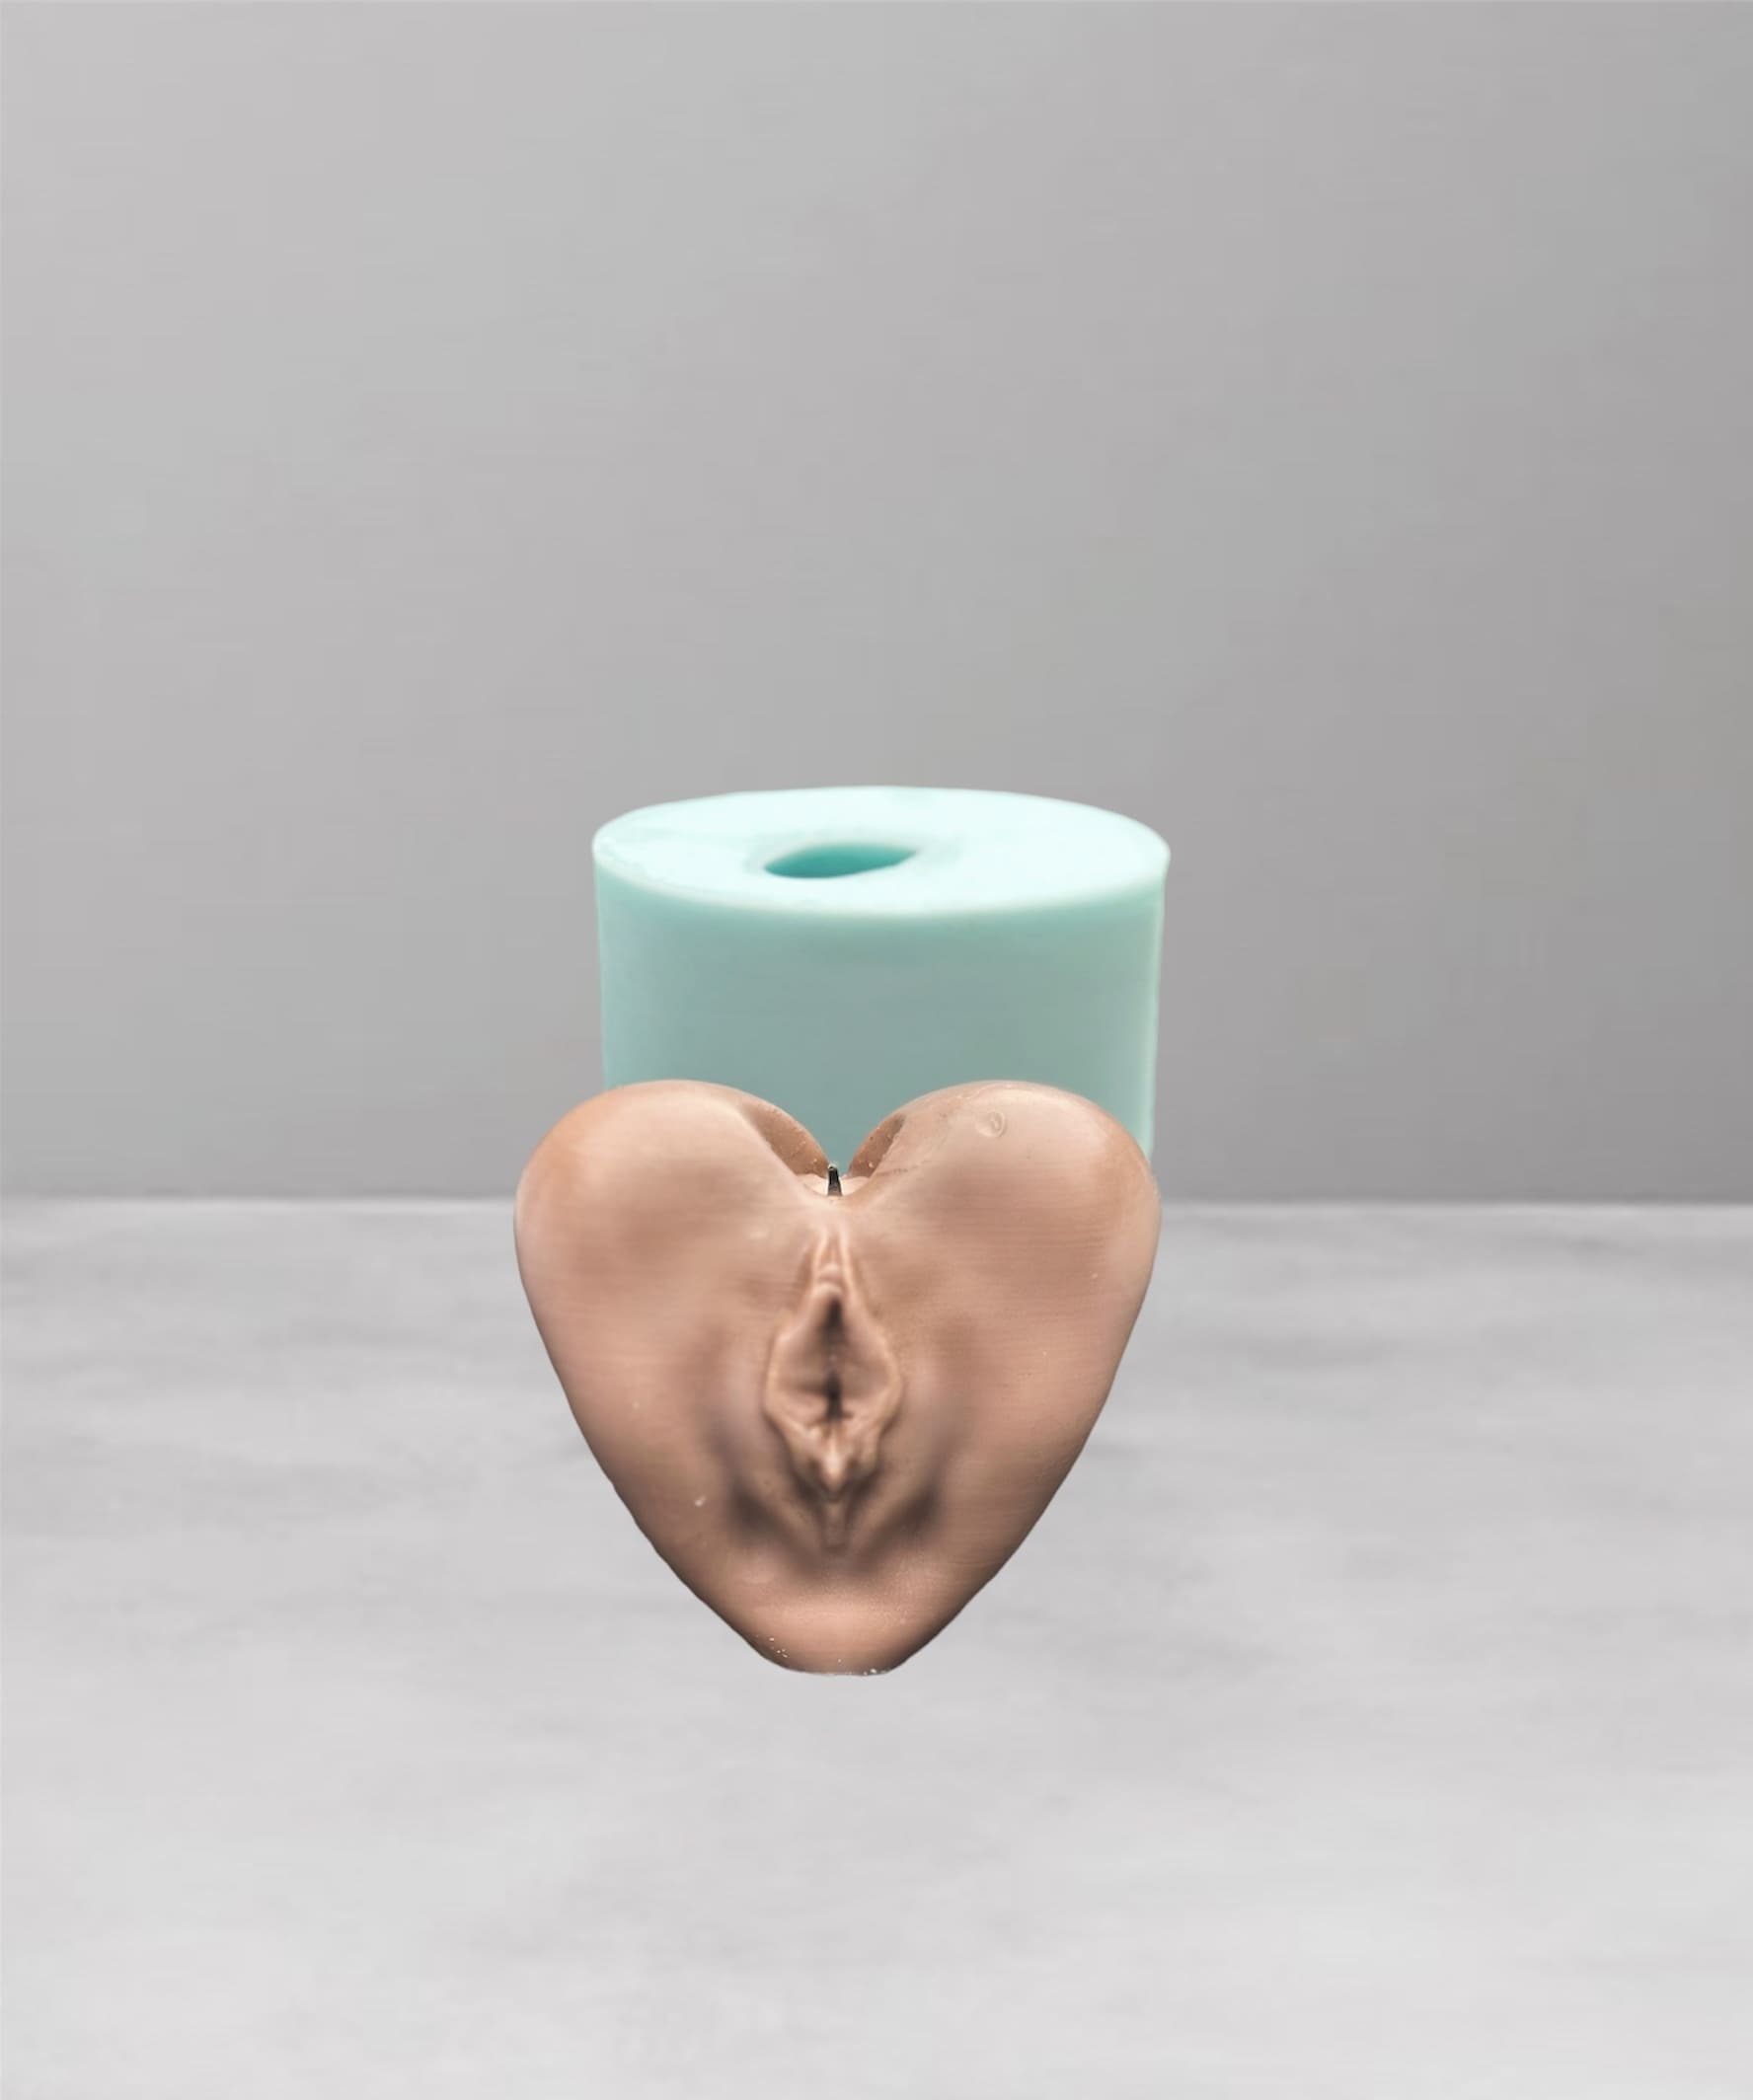 Small Boobs, Vagina & Penis Silicone Mold – The Crafts and Glitter Shop